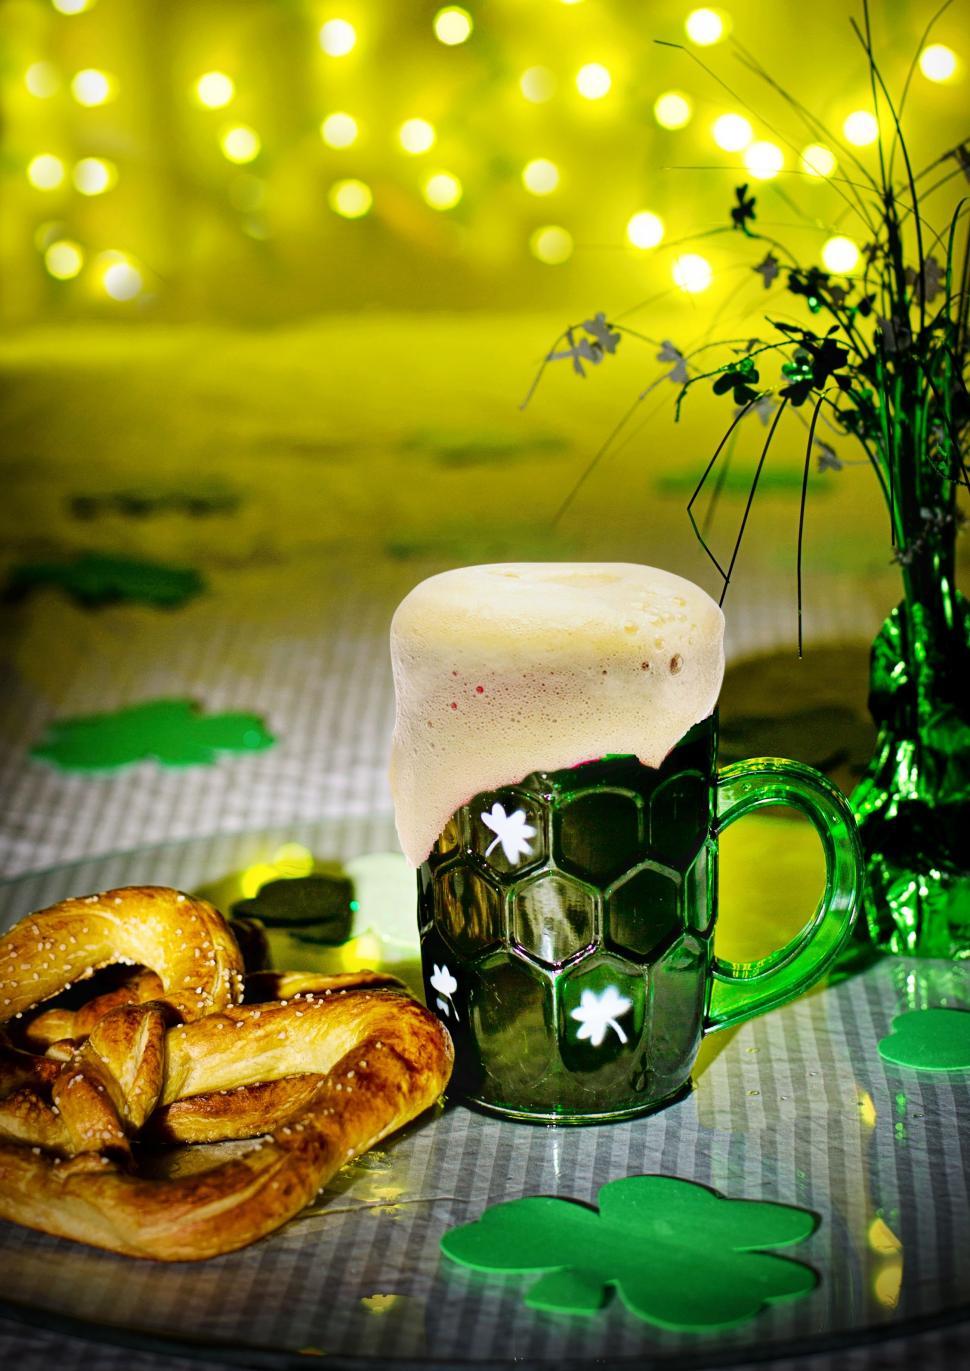 Free Image of Pastry and Beer - St. Patrick\'s Day 